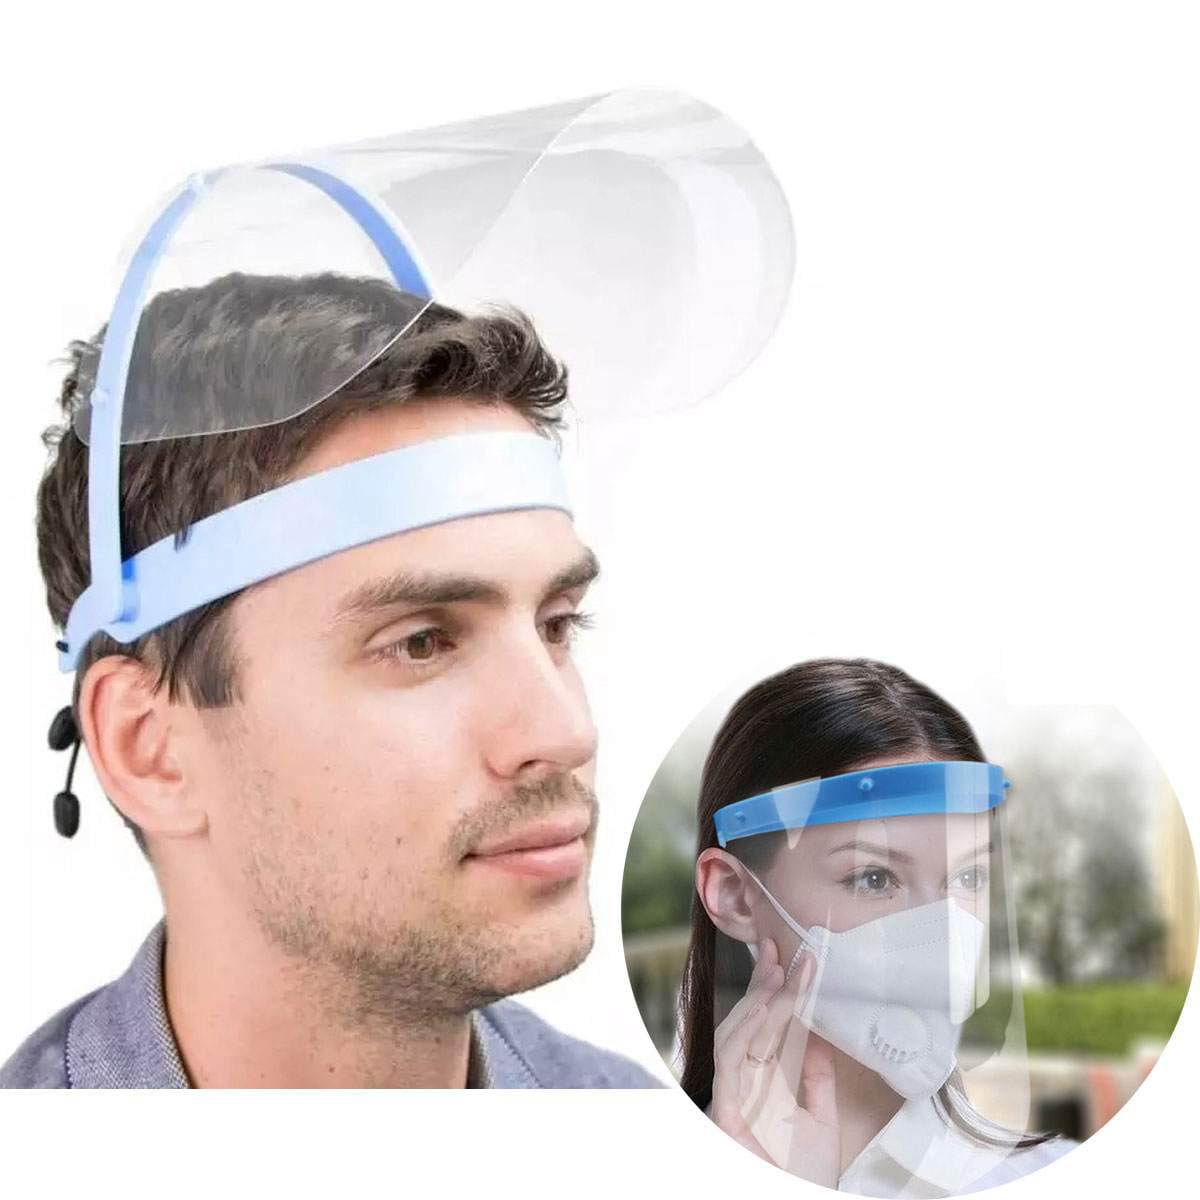 50 X Safety Face Shield All-Round Visor Cap w/Protective Clear Film Elastic Band 